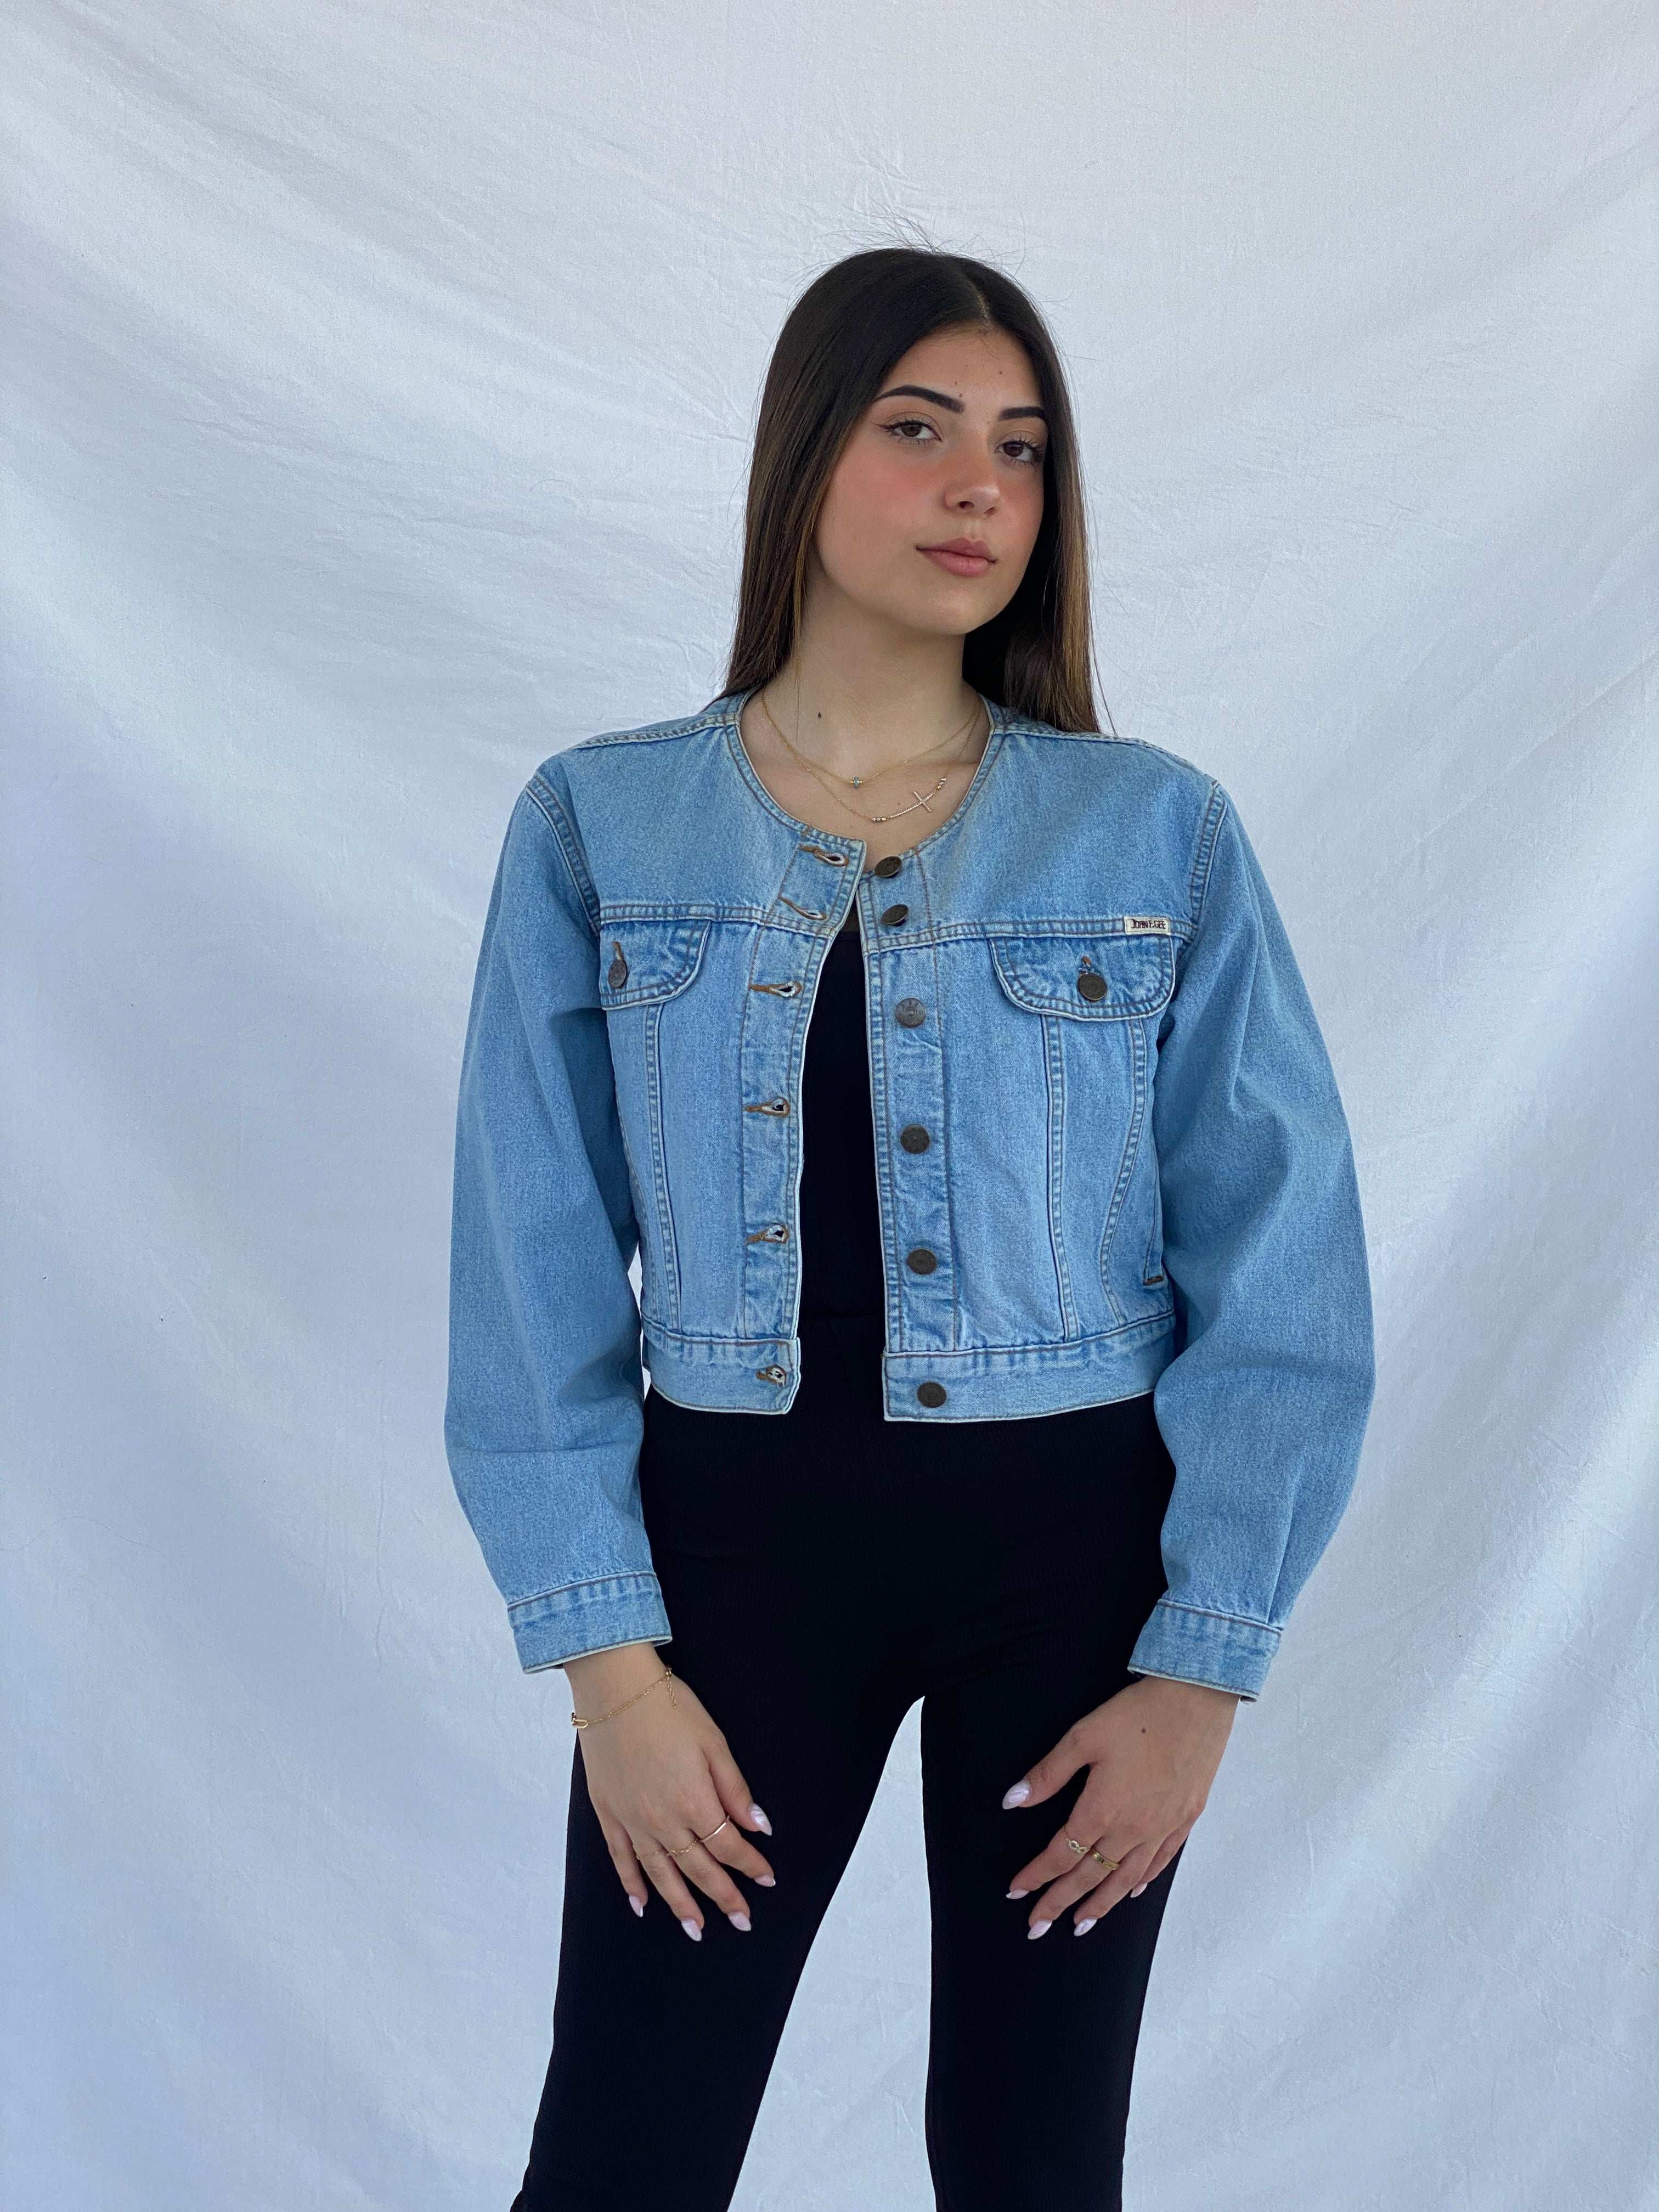 Vintage JOHNF.GEE Cropped Denim Jacket - Size S/M - Balagan Vintage Denim Jacket 00s, denim jacket, Juana, NEW IN